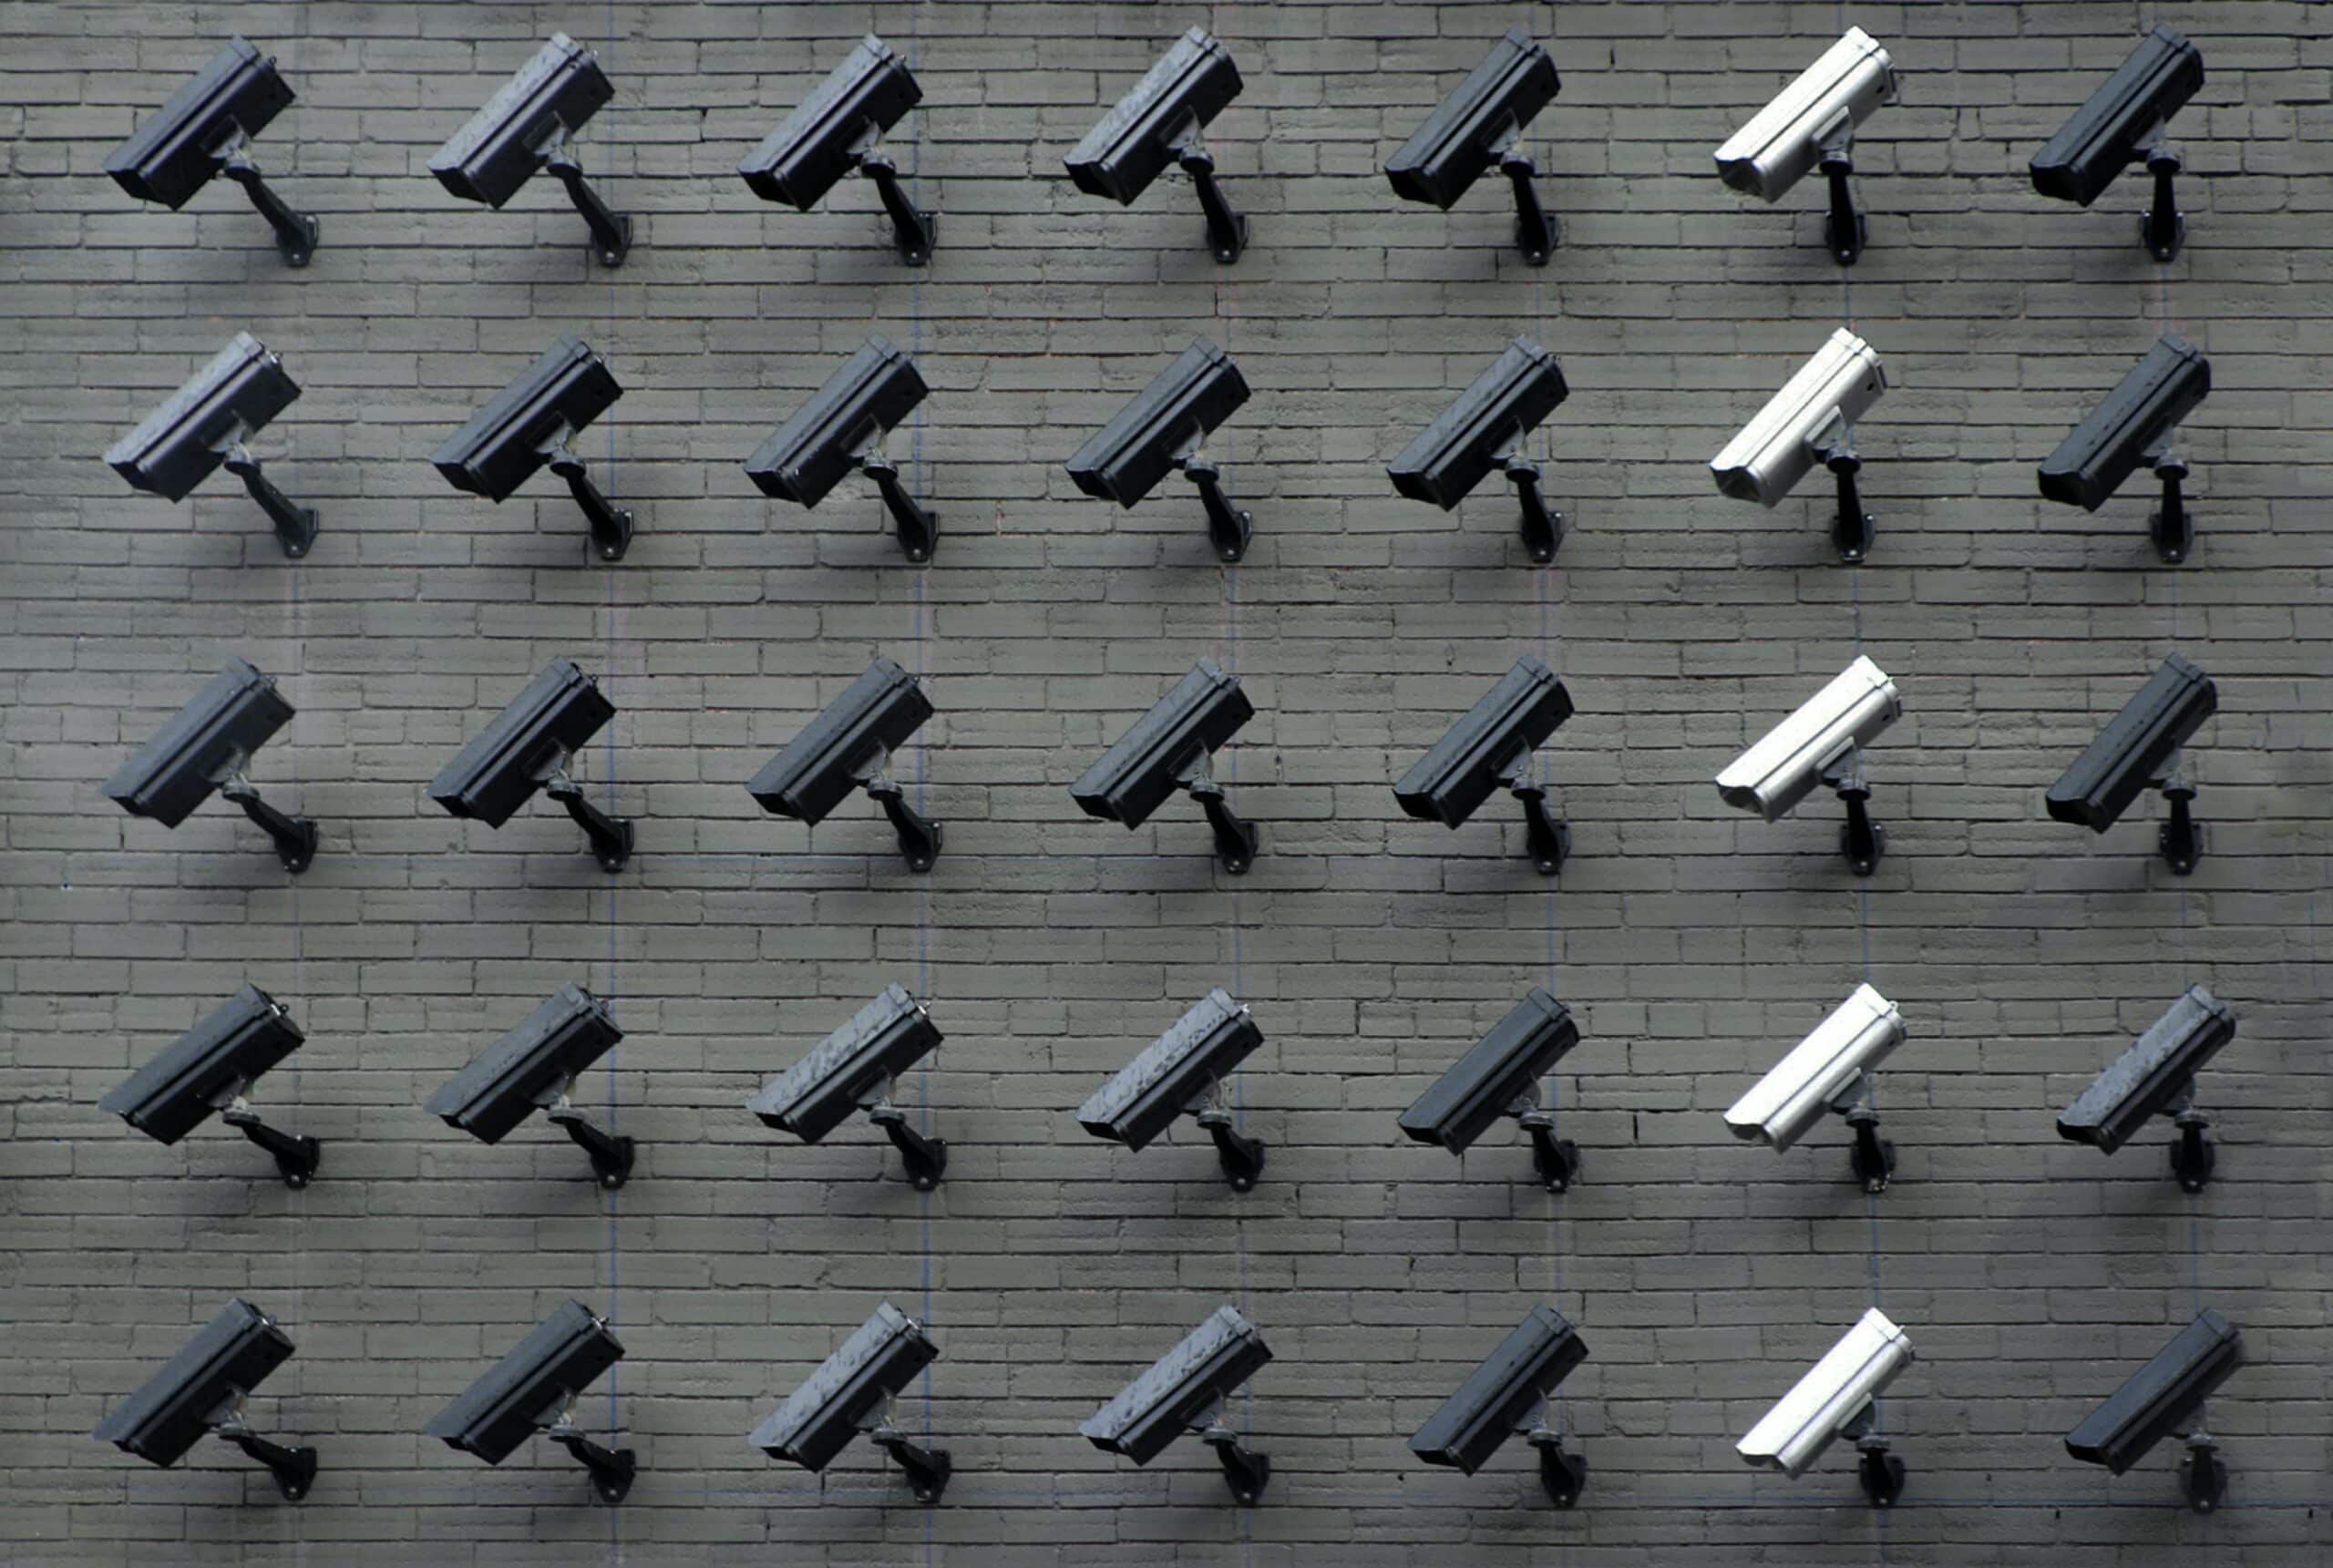 Developing Best Practices for Ethical CCTV Implementation